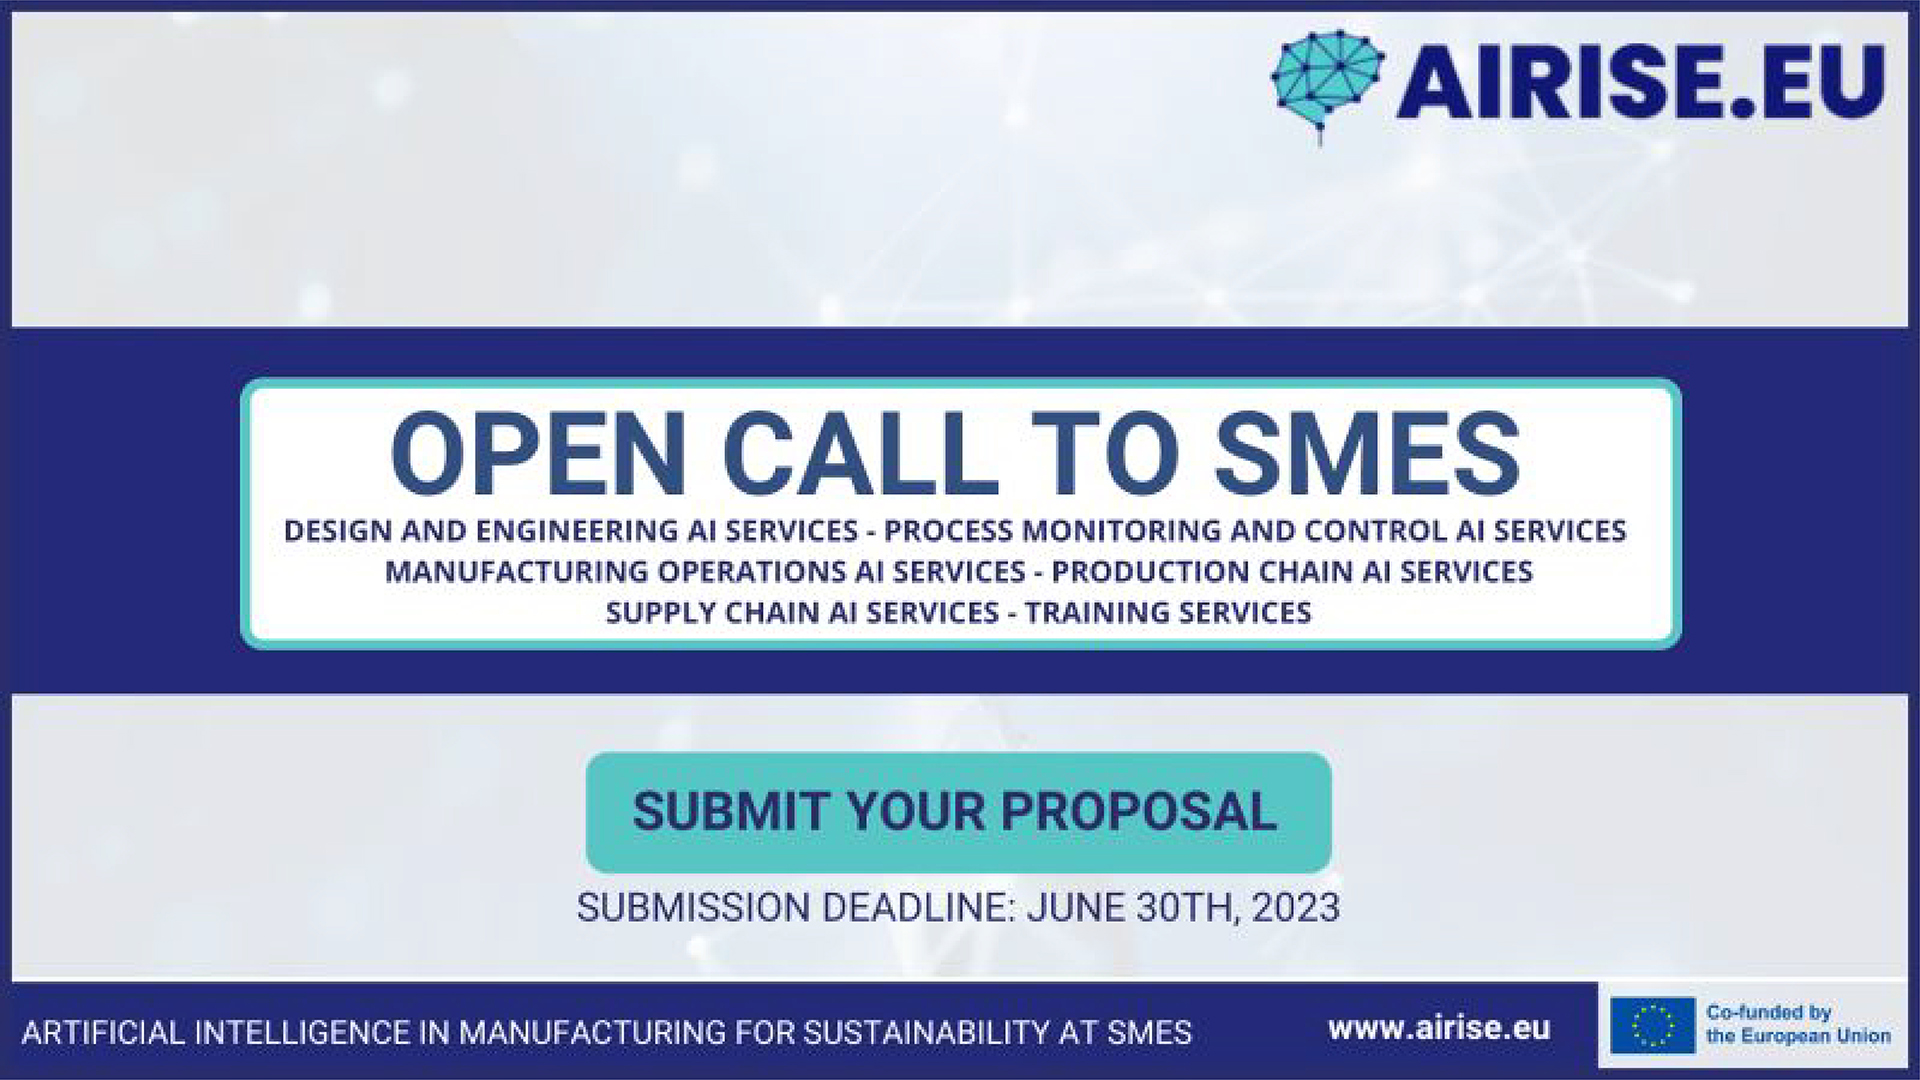 First Call for Proposals, submit Now Your Proposal!